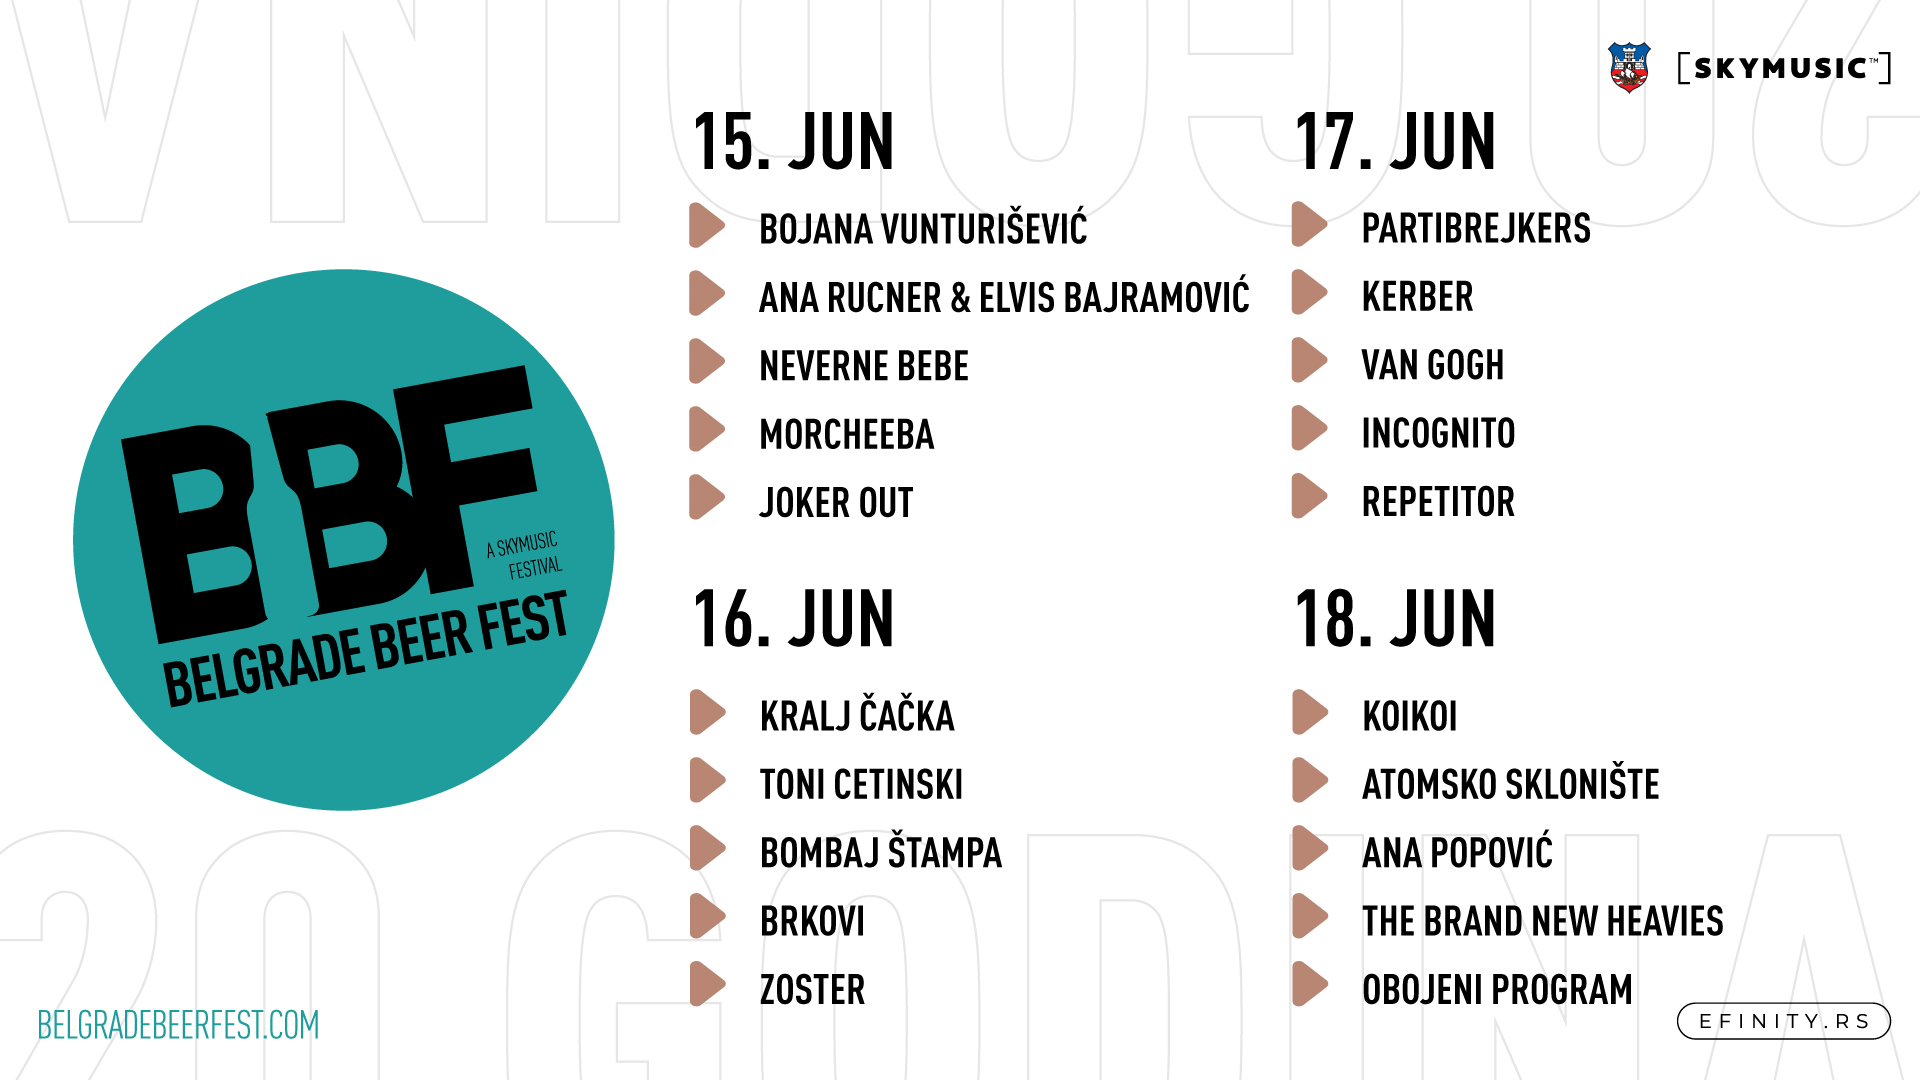 The Belgrade Beer Fest program has been published - here are the performances that await us during the four festival days